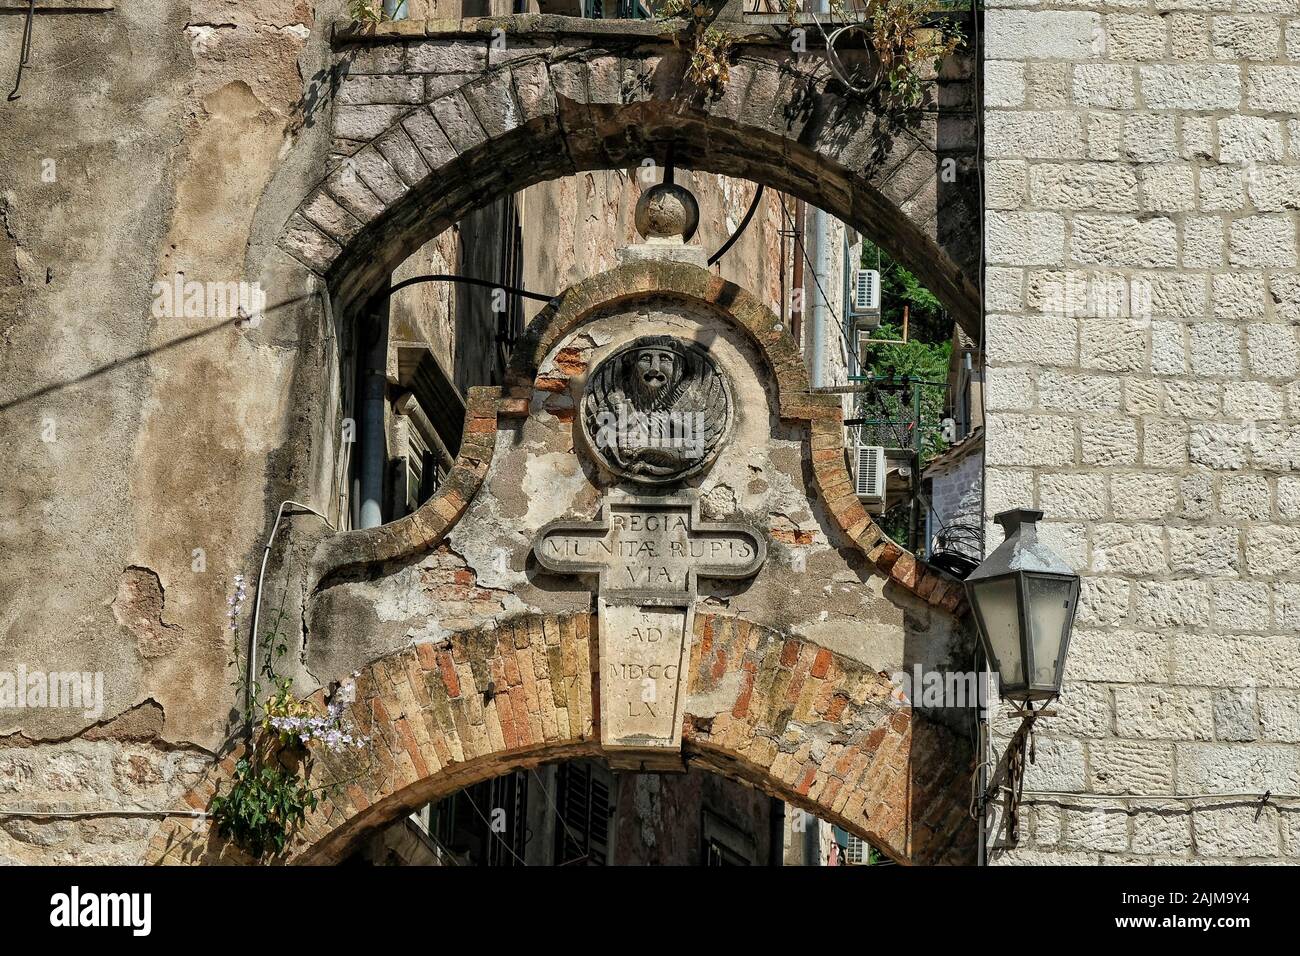 Kotor, Montenegro - June 2019: Street leading to the main entrance of St. John's fortress with the emblem is the Venetian lion on June 21, 2019. Stock Photo